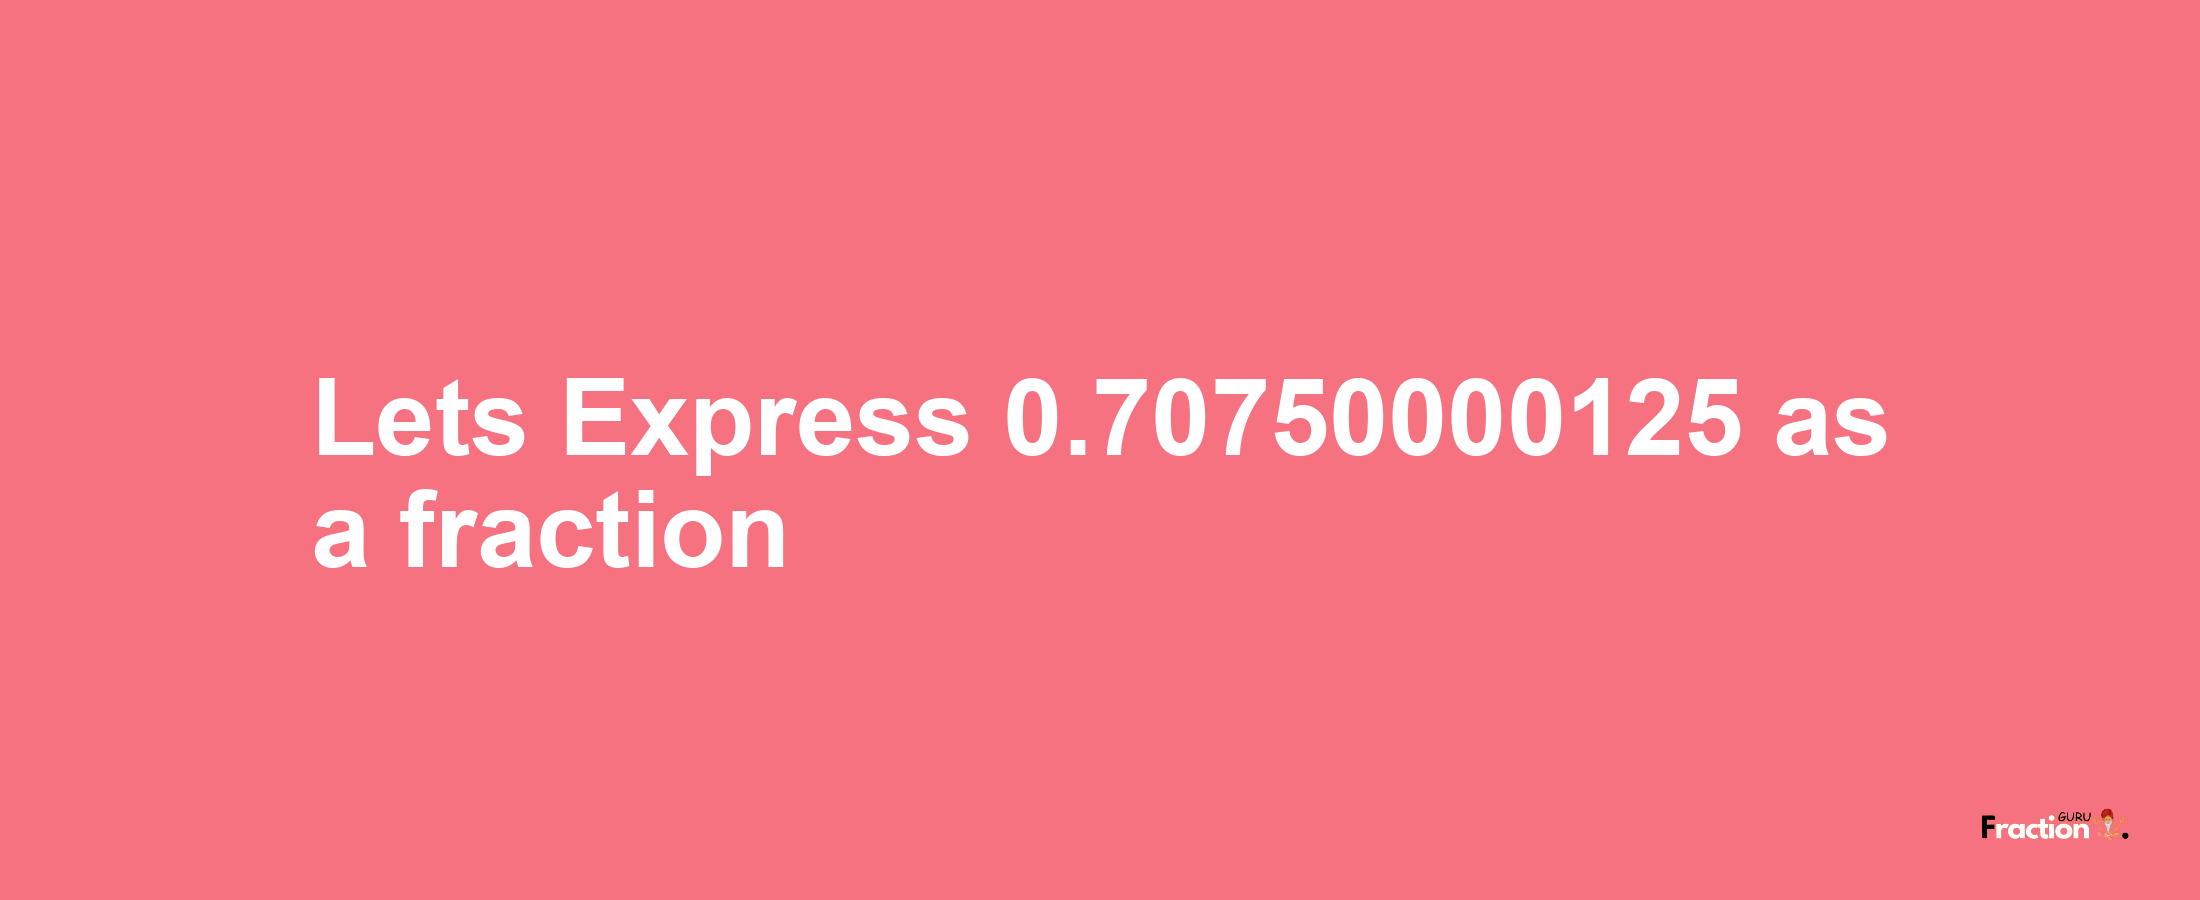 Lets Express 0.70750000125 as afraction